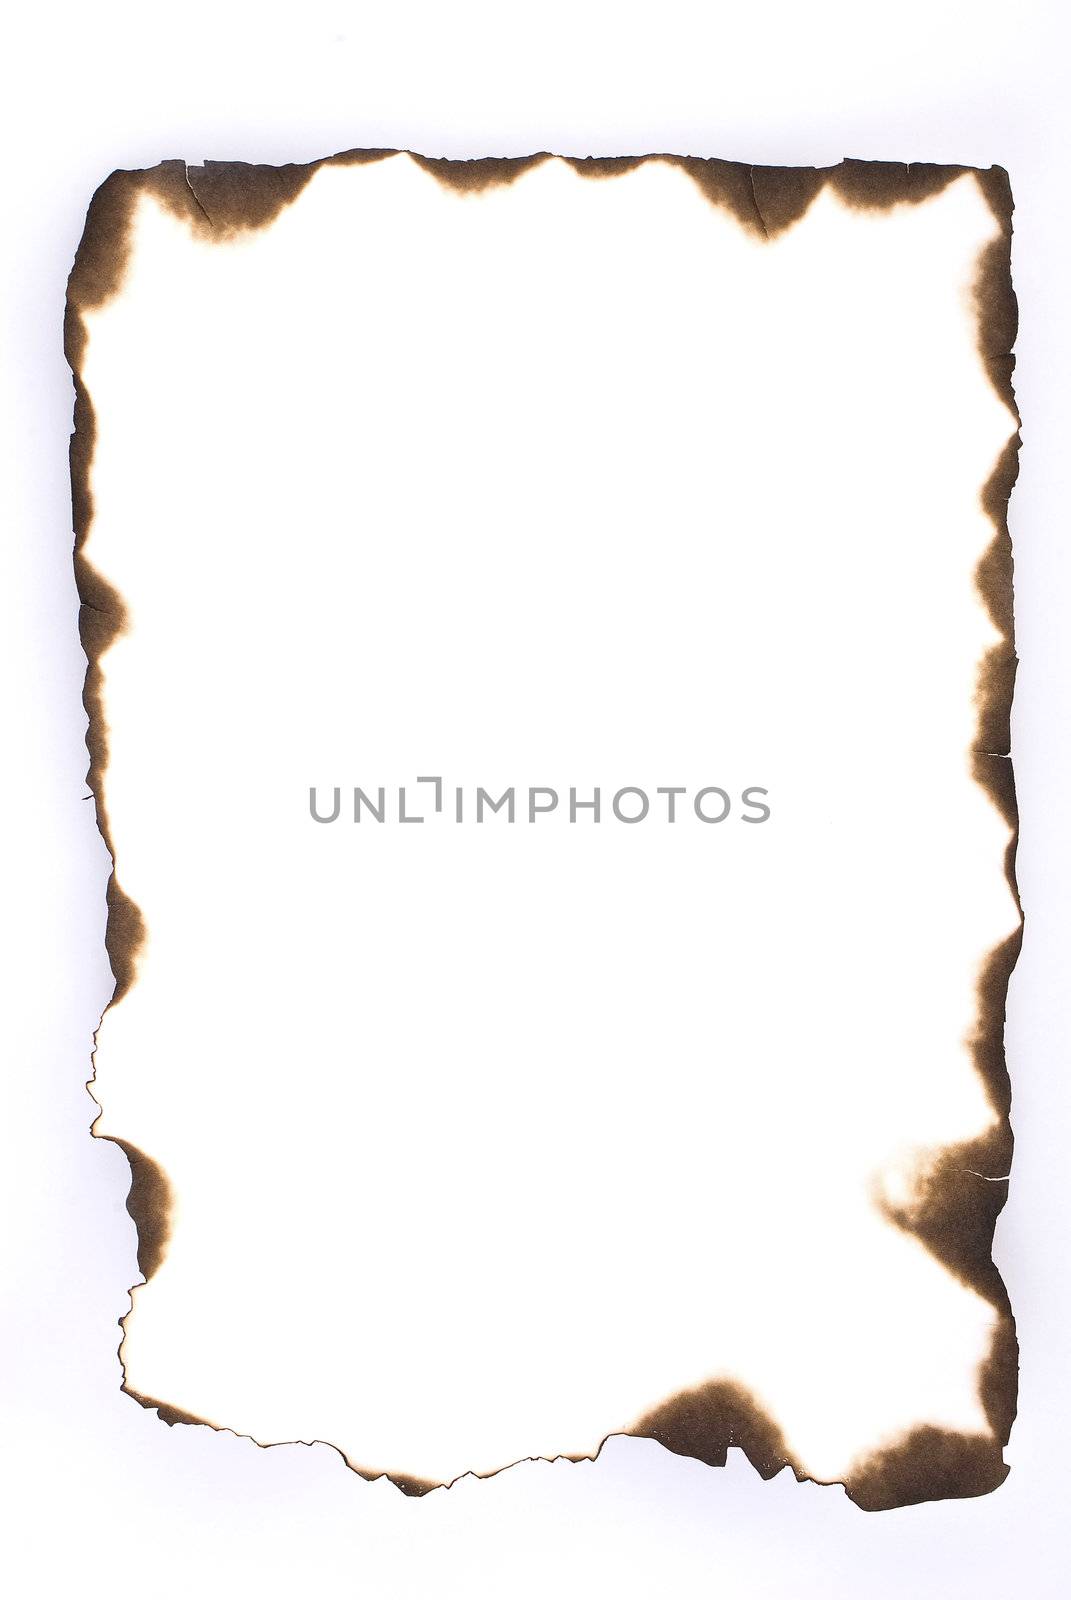 Burned paper over the white background